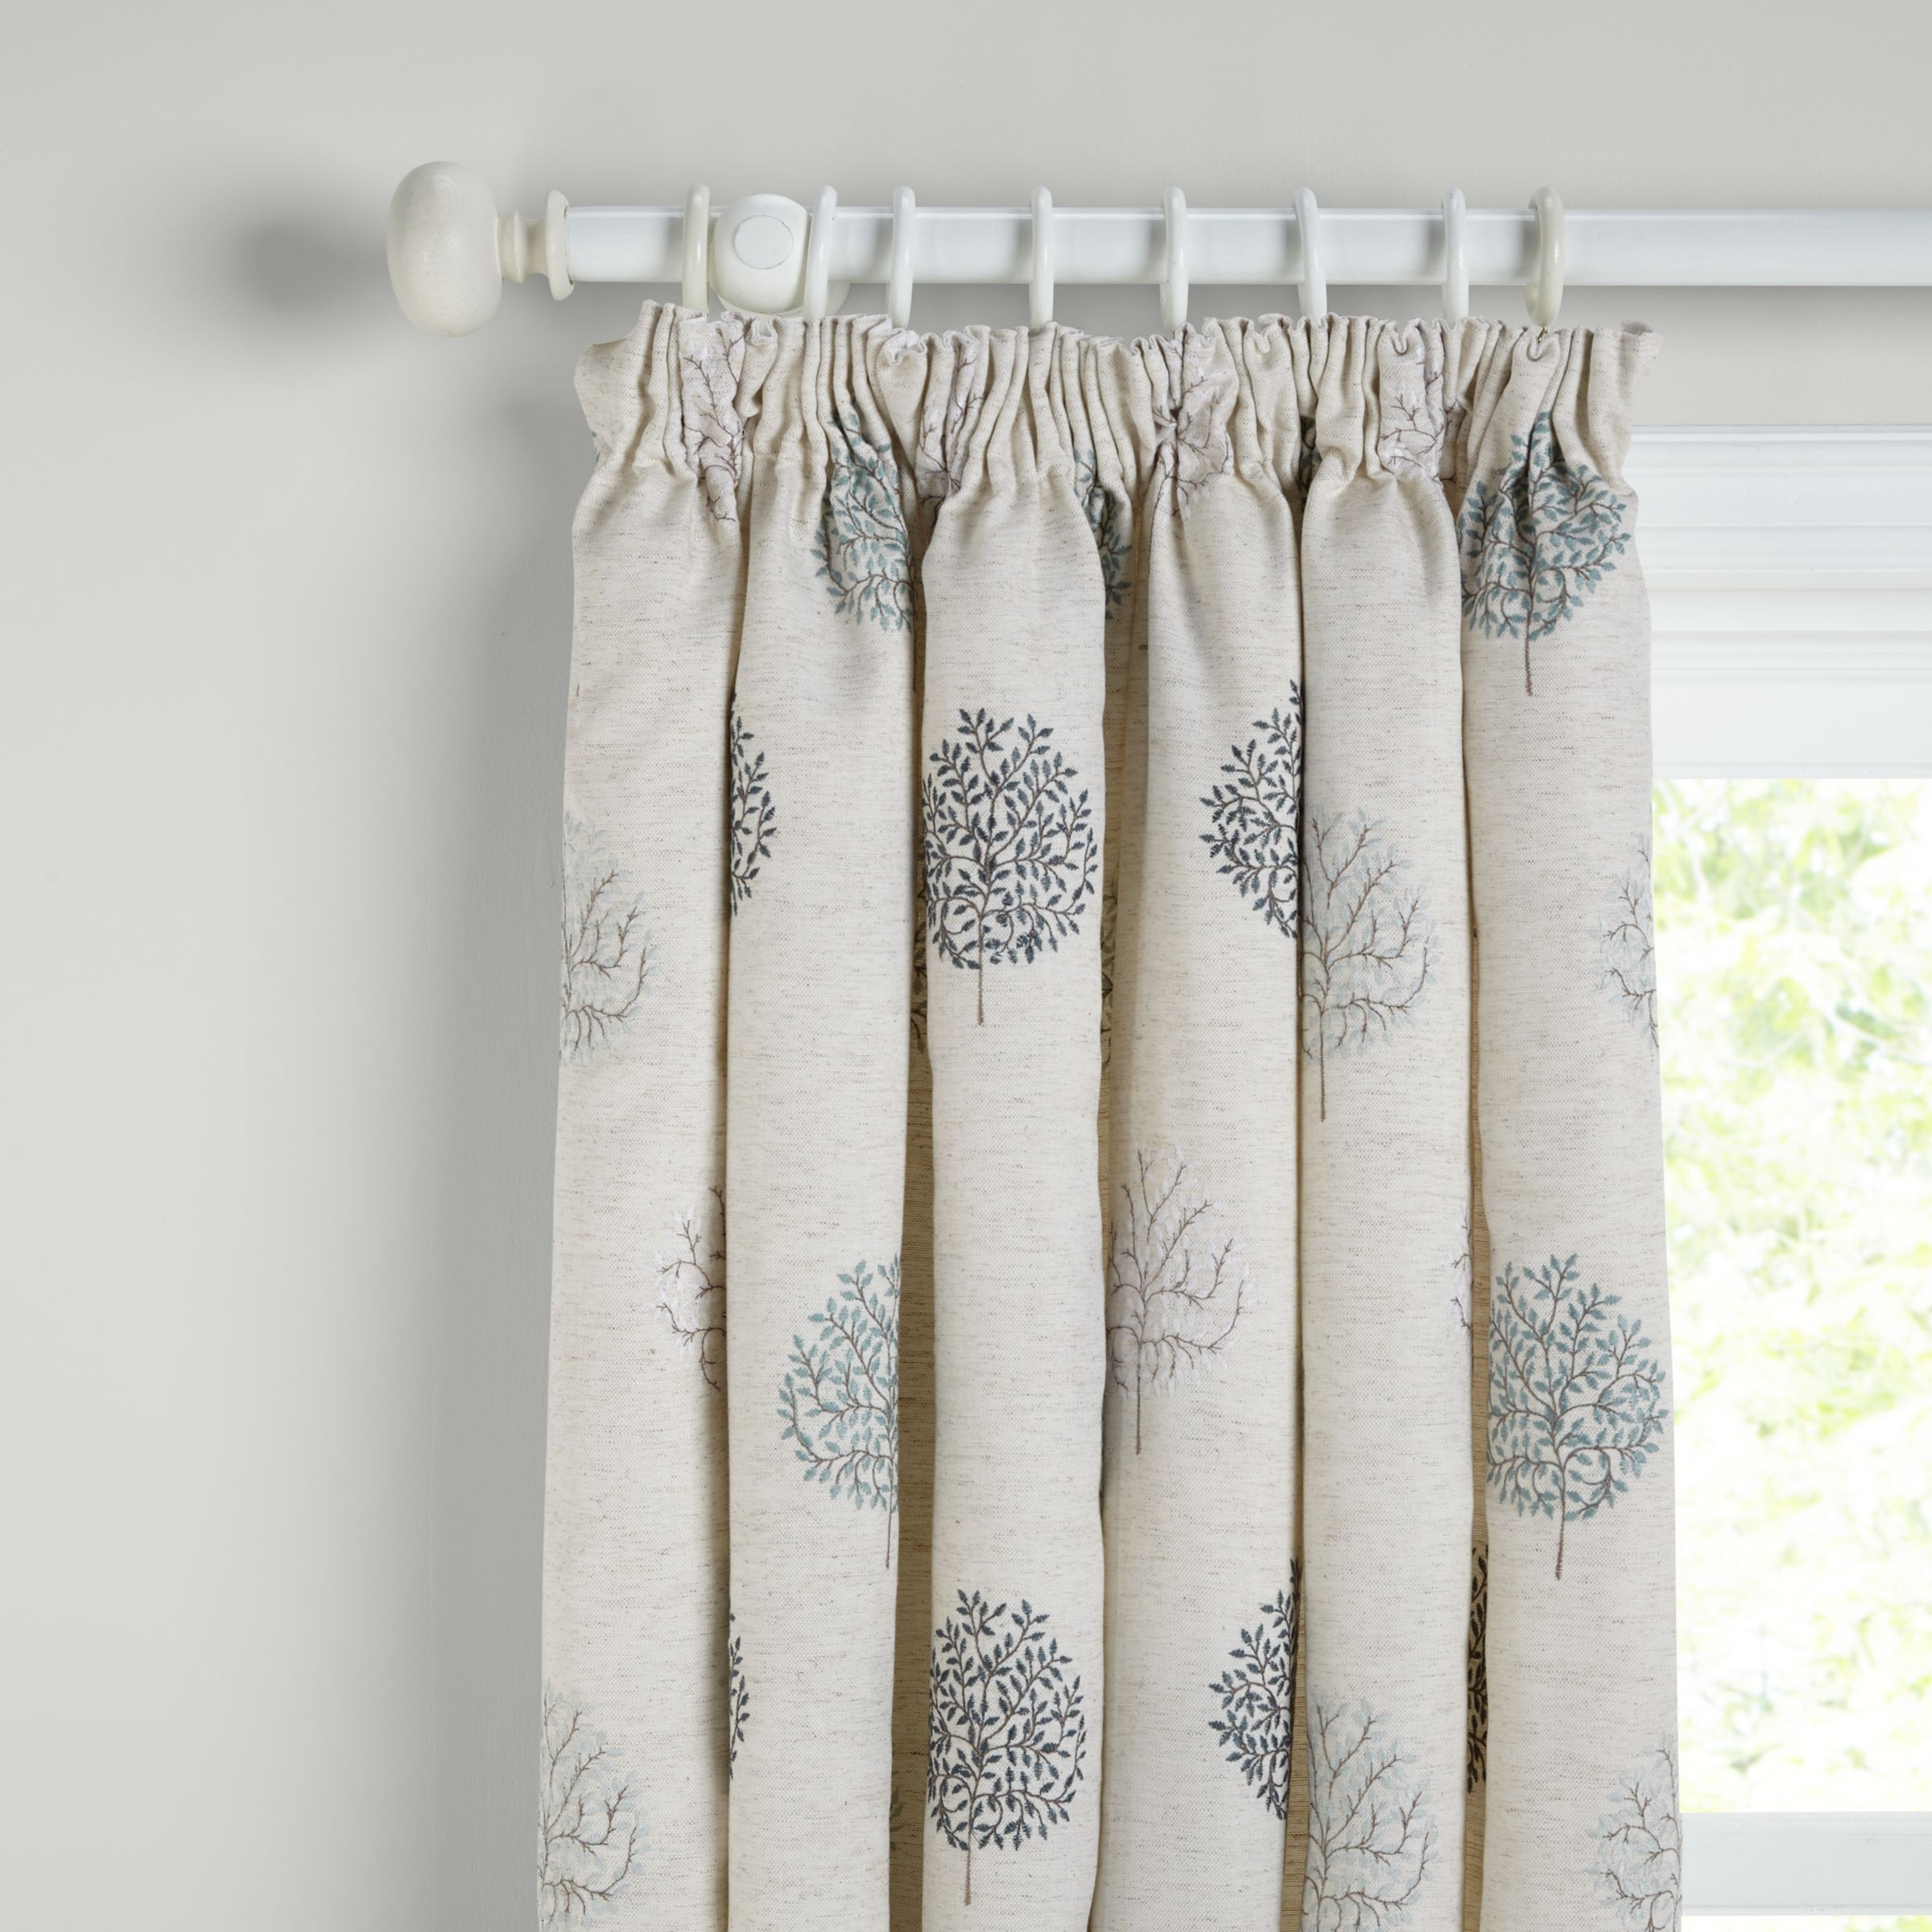 John Lewis Mini Olive Trees Embroidery Pair Lined Pencil Pleat Curtains, Duck Egg - image 1